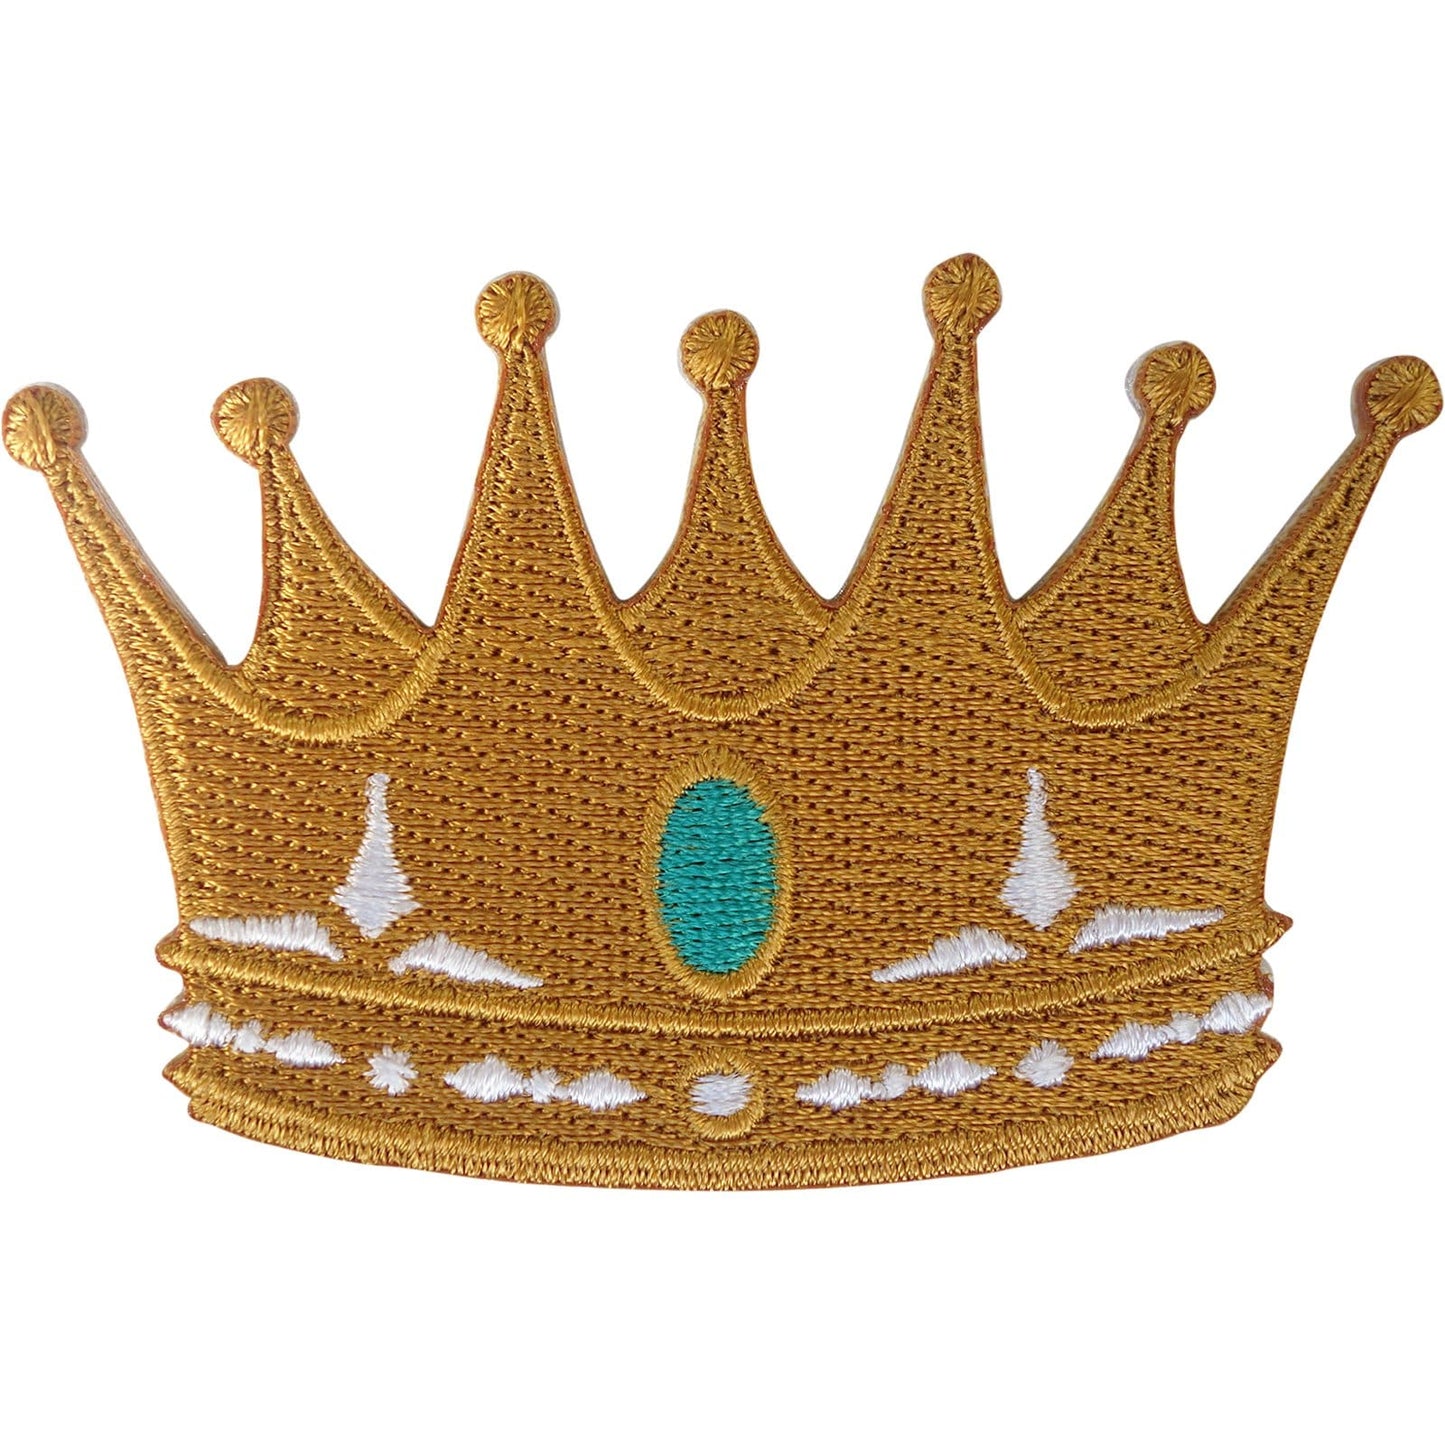 Gold Crown Patch Iron Sew On Clothes Bag Embroidered Badge Embroidery Applique